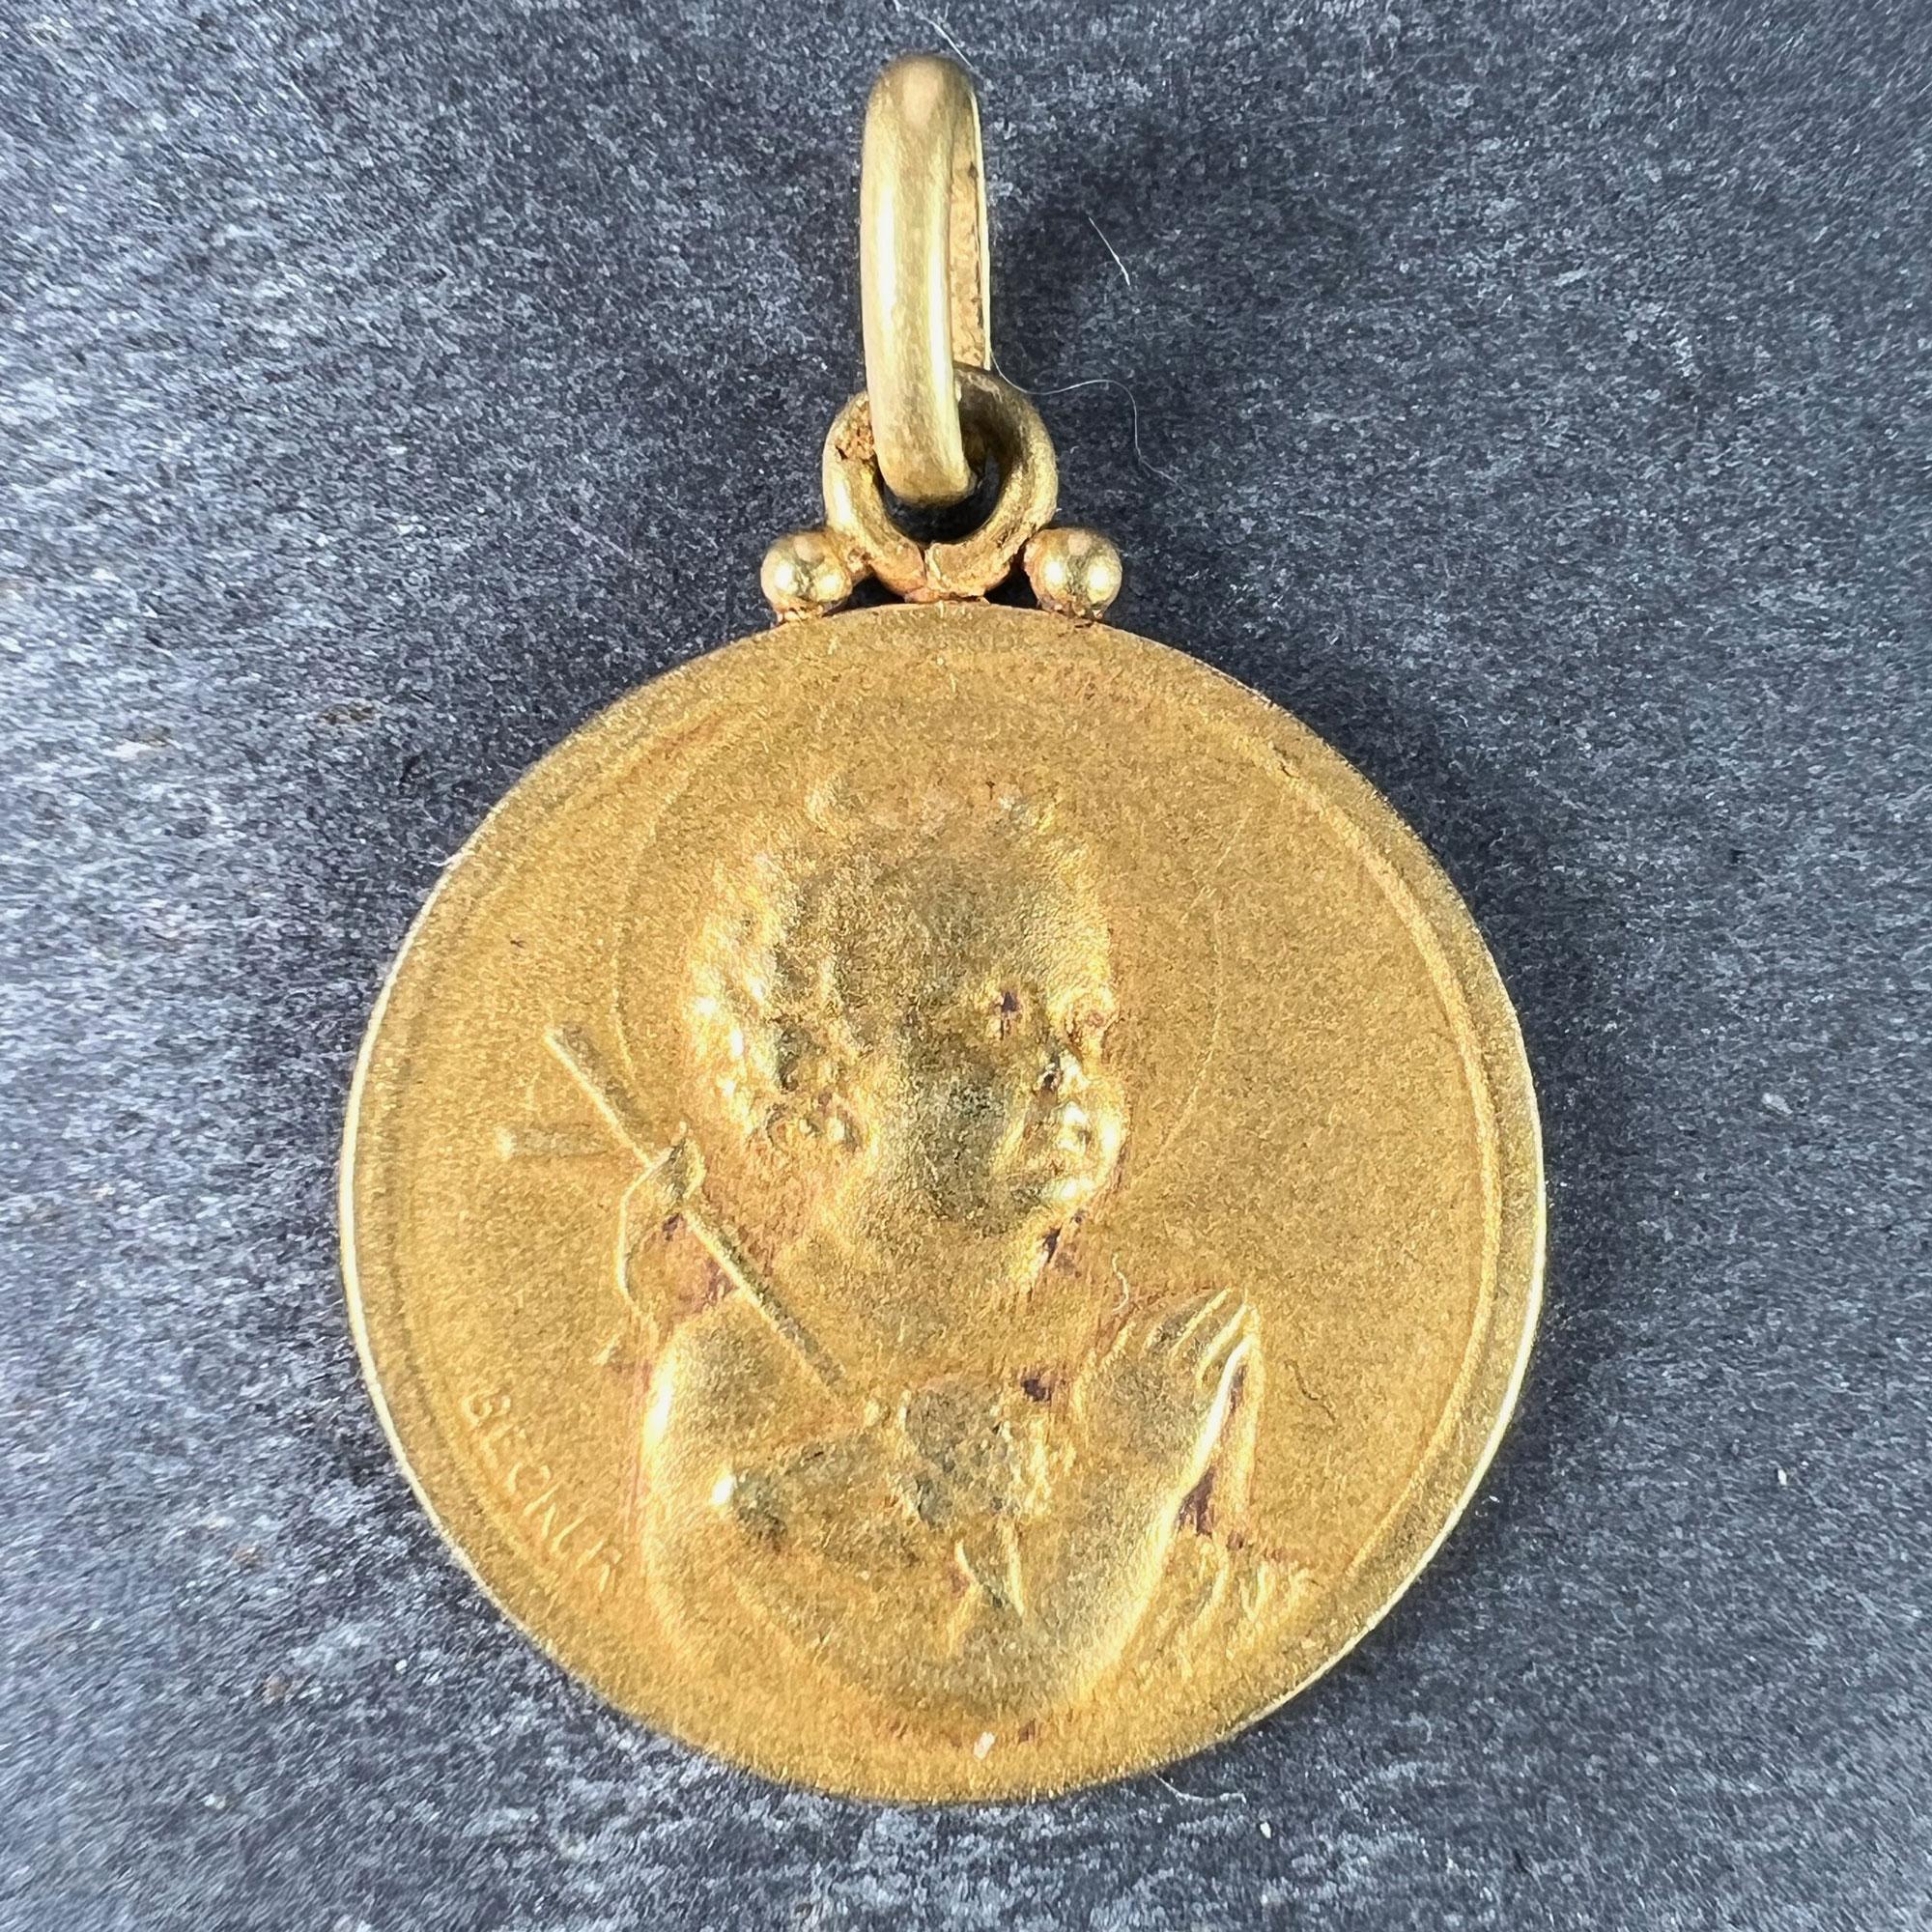 A French 18 karat (18K) yellow gold charm pendant designed as a medal depicting the Jesus Child holding the Lamb of God and a shepherd's crook while praying. The reverse shows the top of a column with roses surmounting it. Signed Becker and stamped